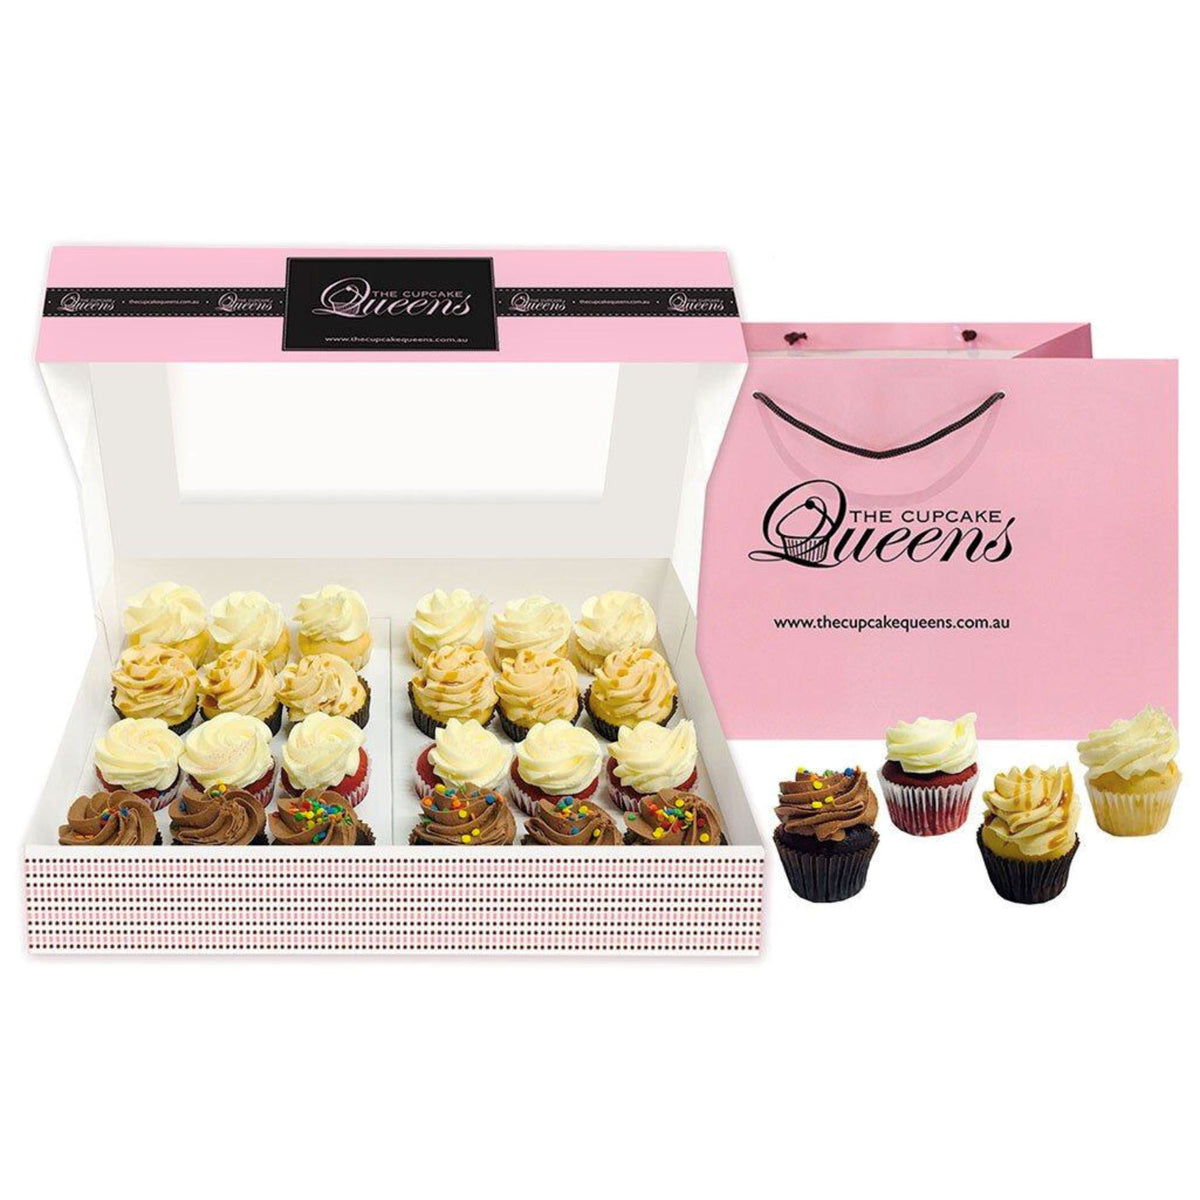 Mini Top Four Cupcakes Online Boxes The Cupcake Queens 